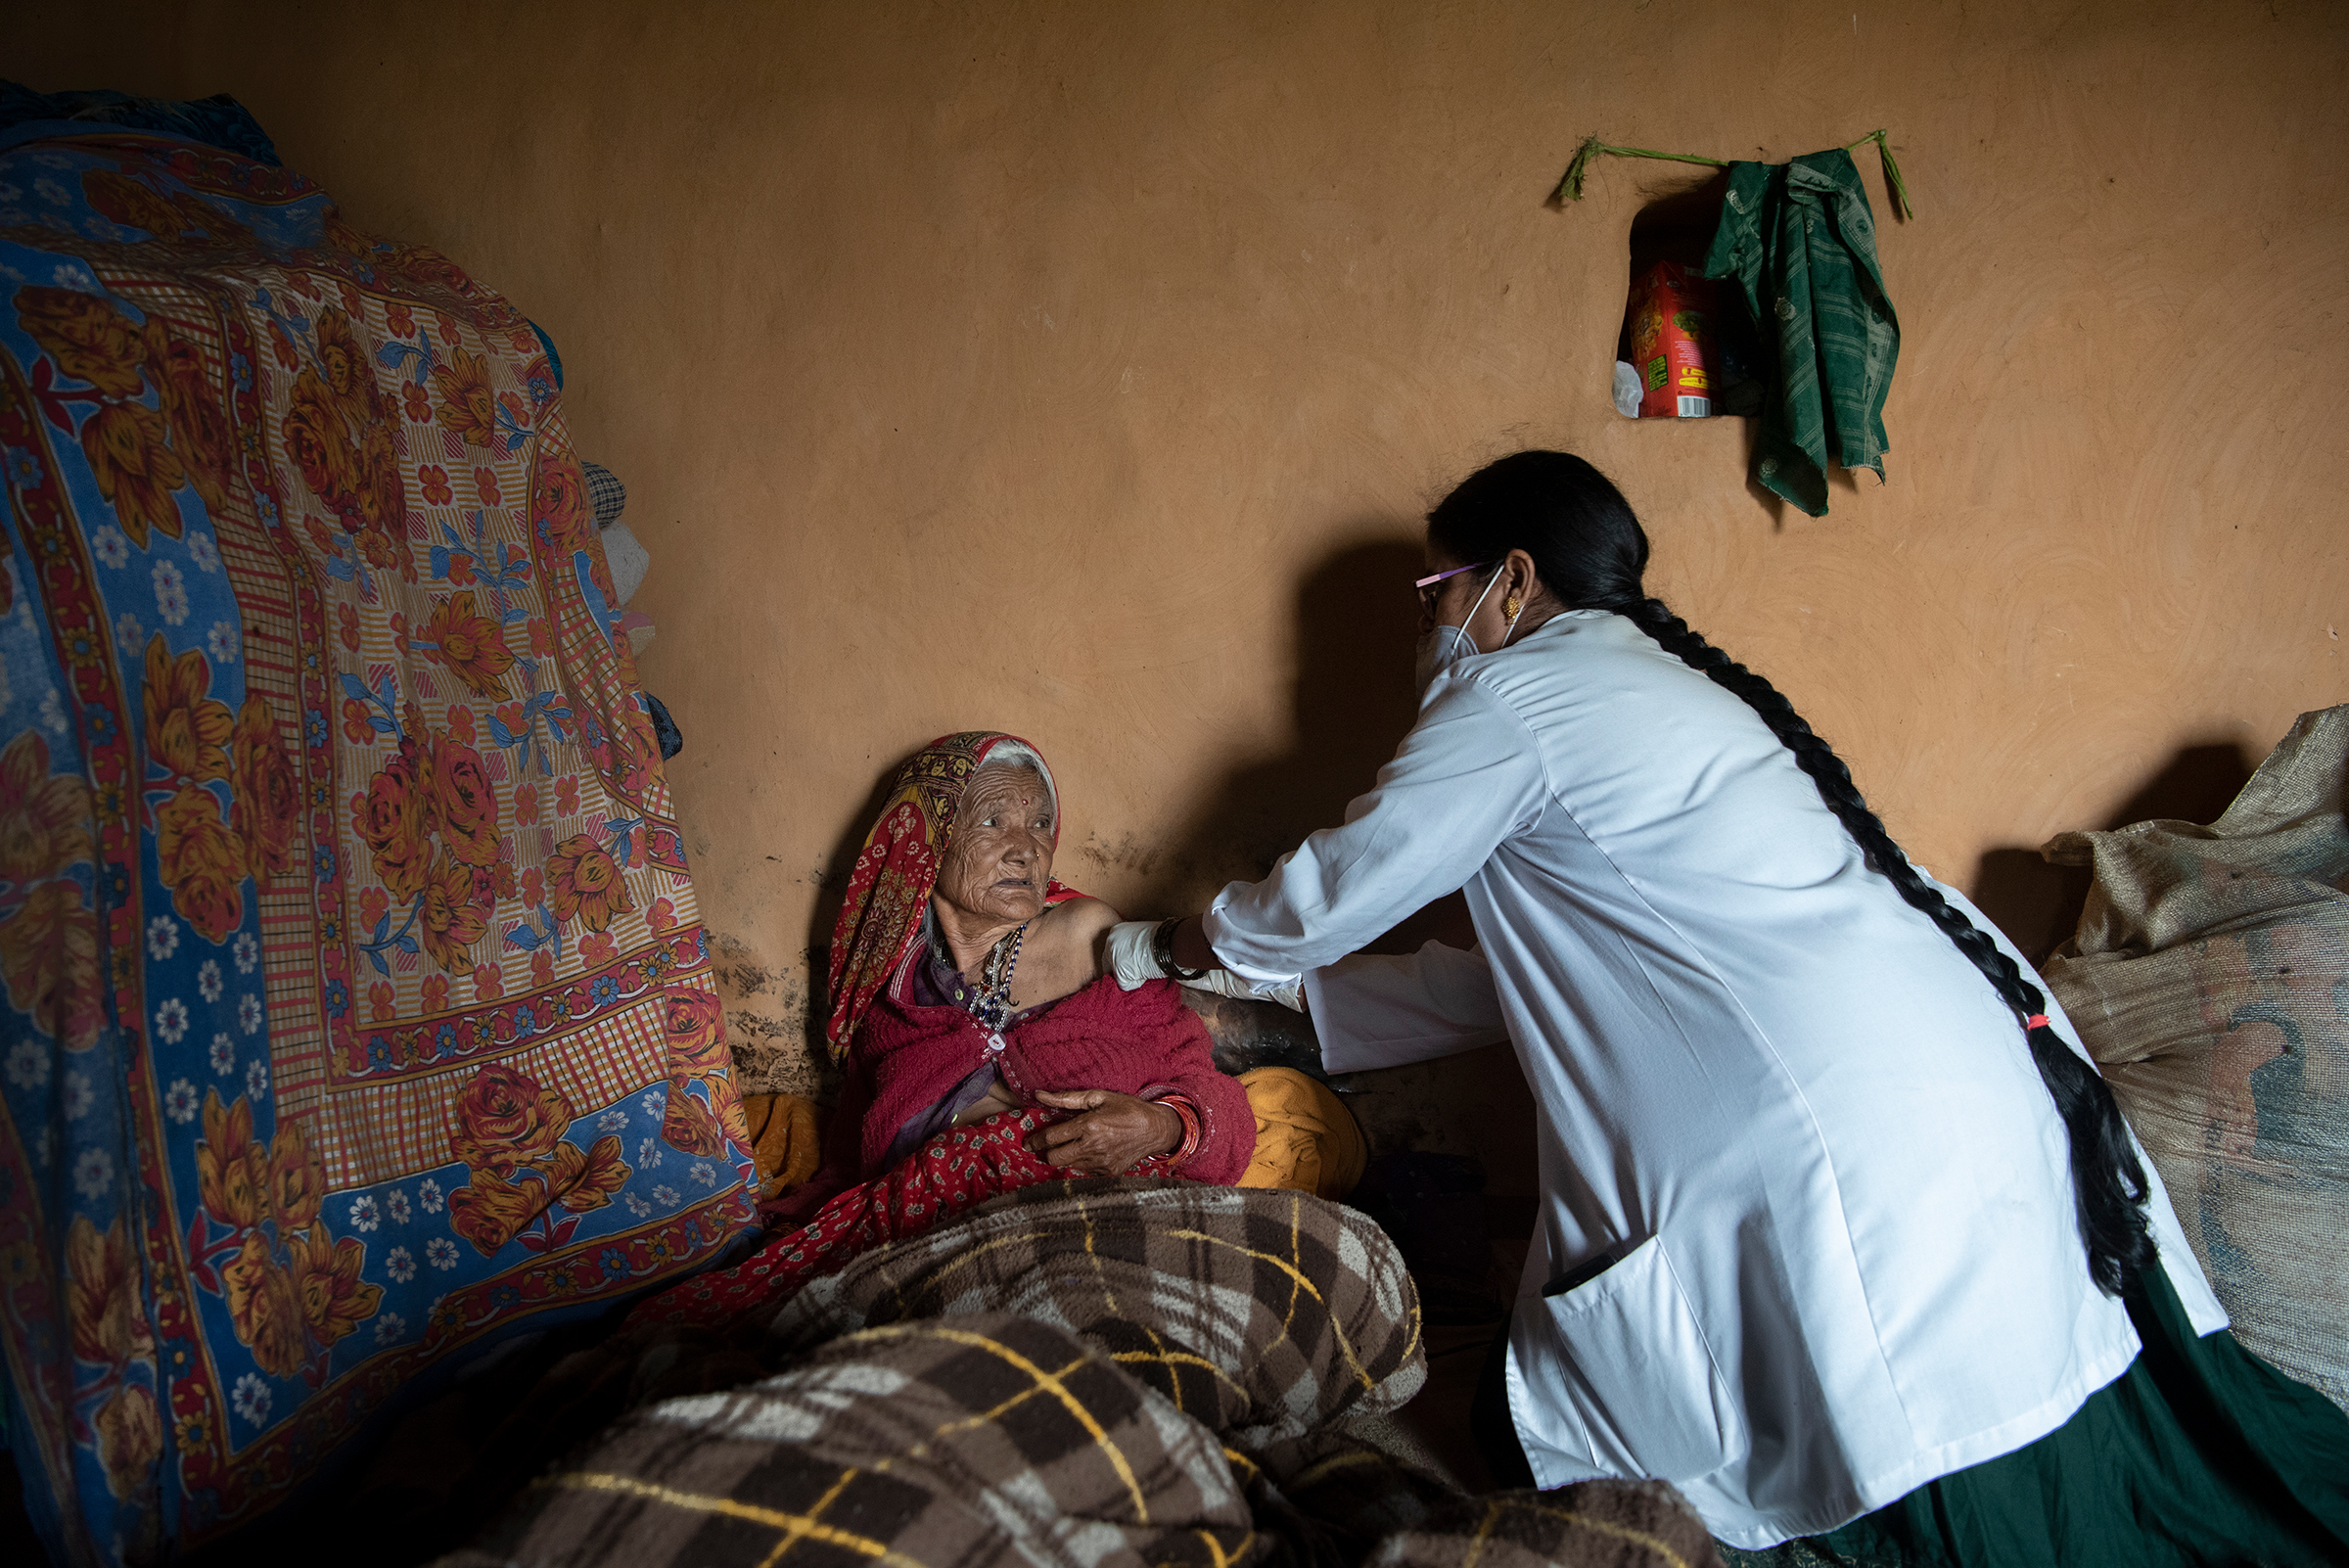 Gokuli Devi, 80, receives a vaccine at her home near Aghariya, India, on Sept. 4, 2021 because she is too frail to walk to a local <a href="https://time.com/6148101/india-covid-19-vaccination-success-himalayan-district/">COVID-19 vaccination</a> site. (Saumya Khandelwal for TIME)